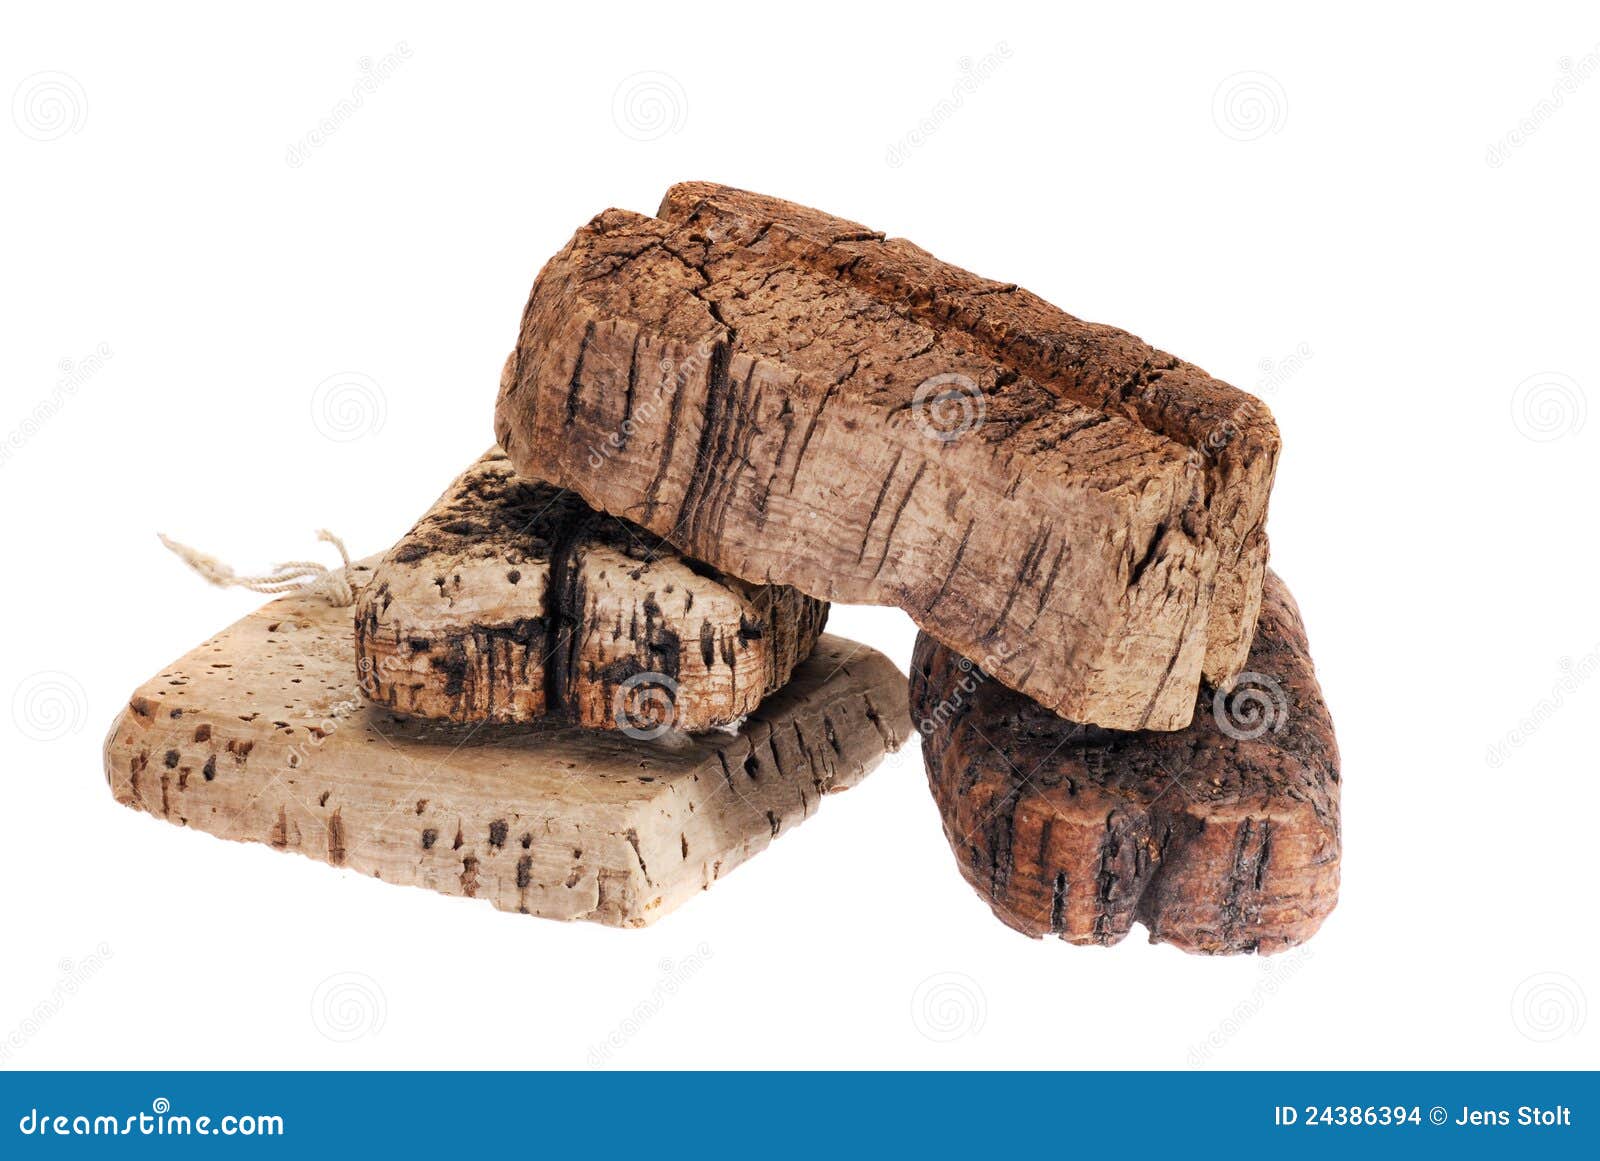 Cork floats for fishing stock photo. Image of float, cork - 24386394